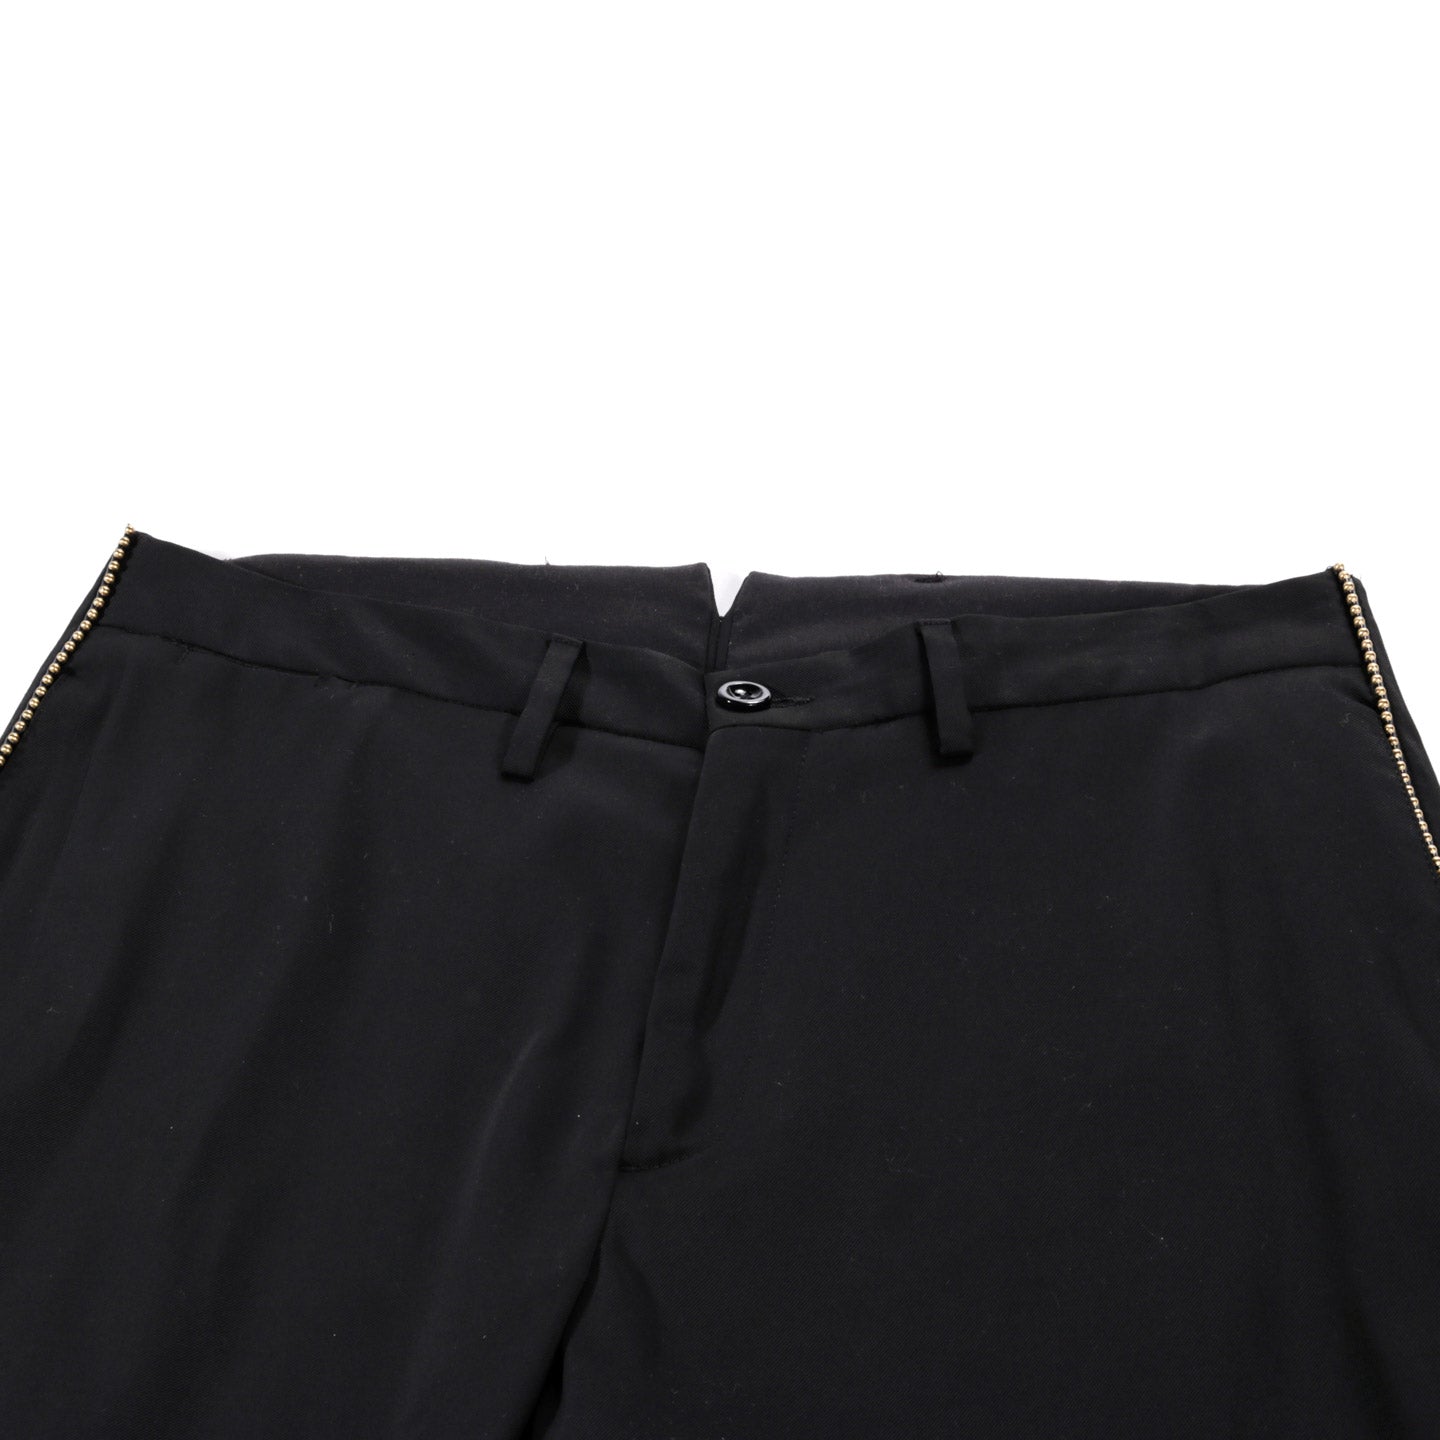 4SDESIGNS H.SARTORIAL PANT BLACK PC TWILL LEATHER STUD PIPING